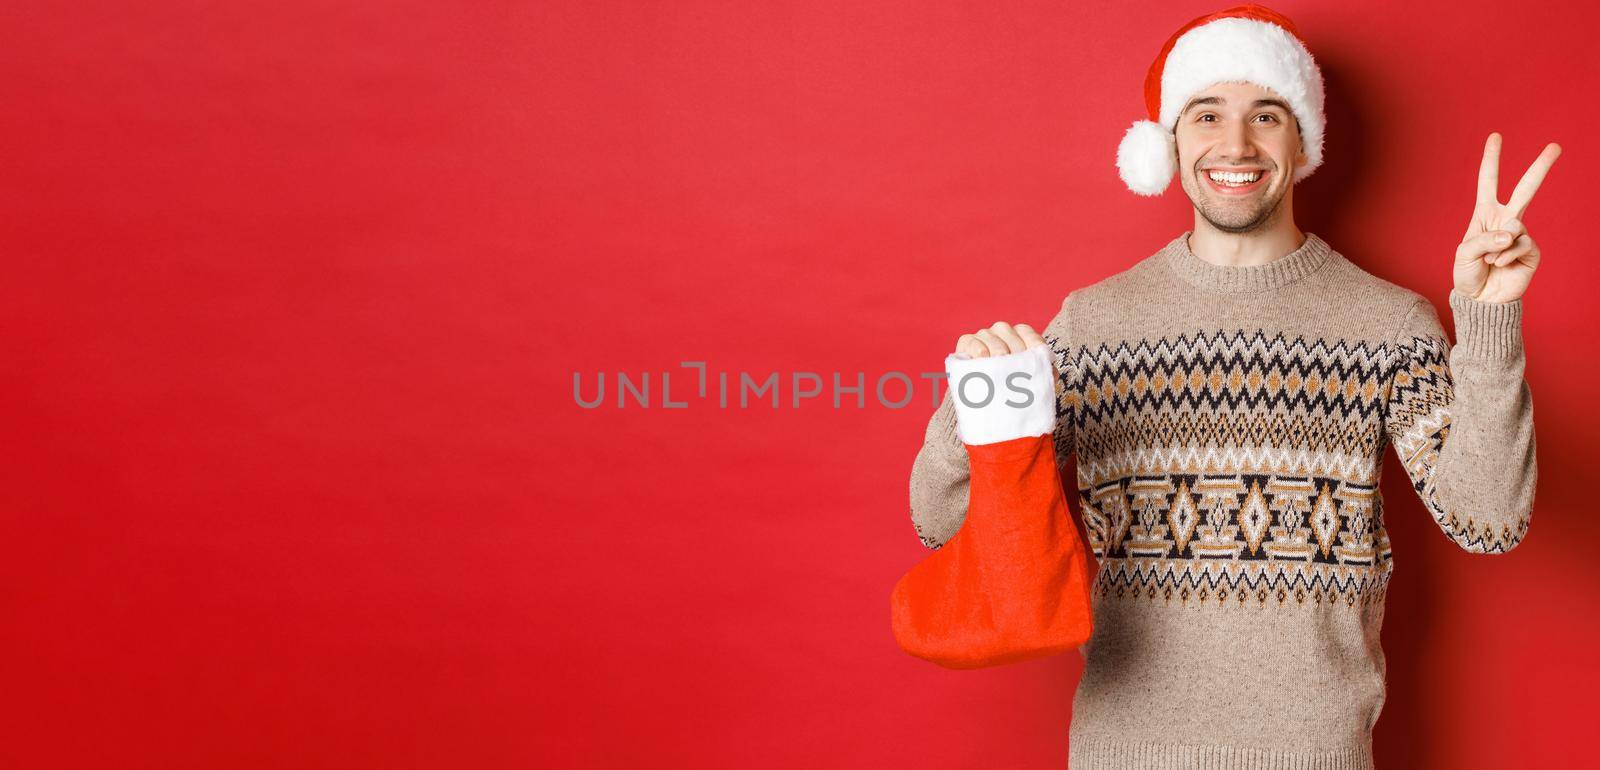 Concept of winter holidays, new year and celebration. Image of happy smiling man in santa hat and sweater, showing peace sign and a christmas stocking bag with gifts, red background.